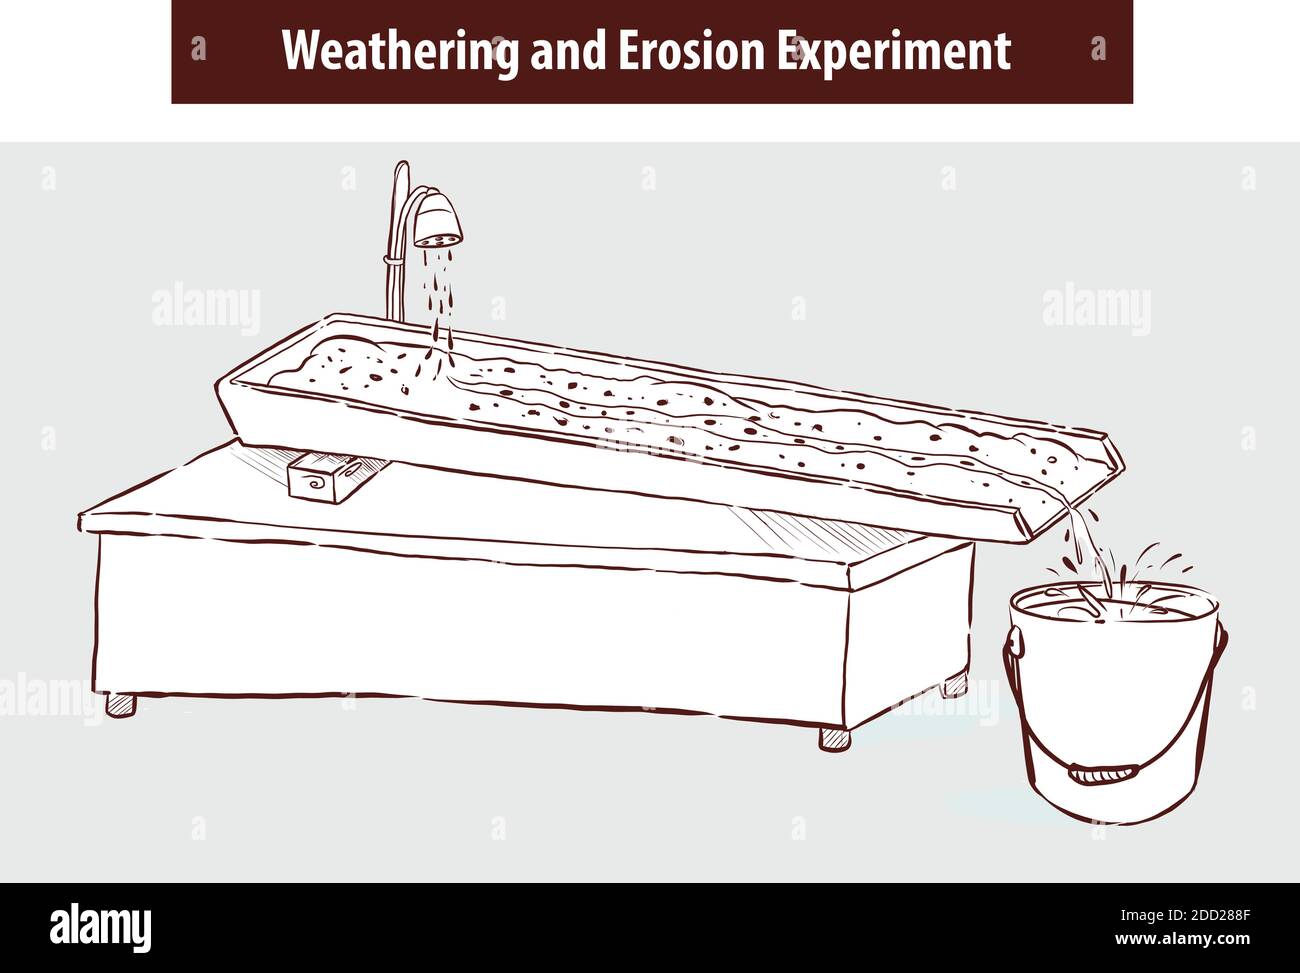 Weathering and erosion experiment vector illustration Stock Vector